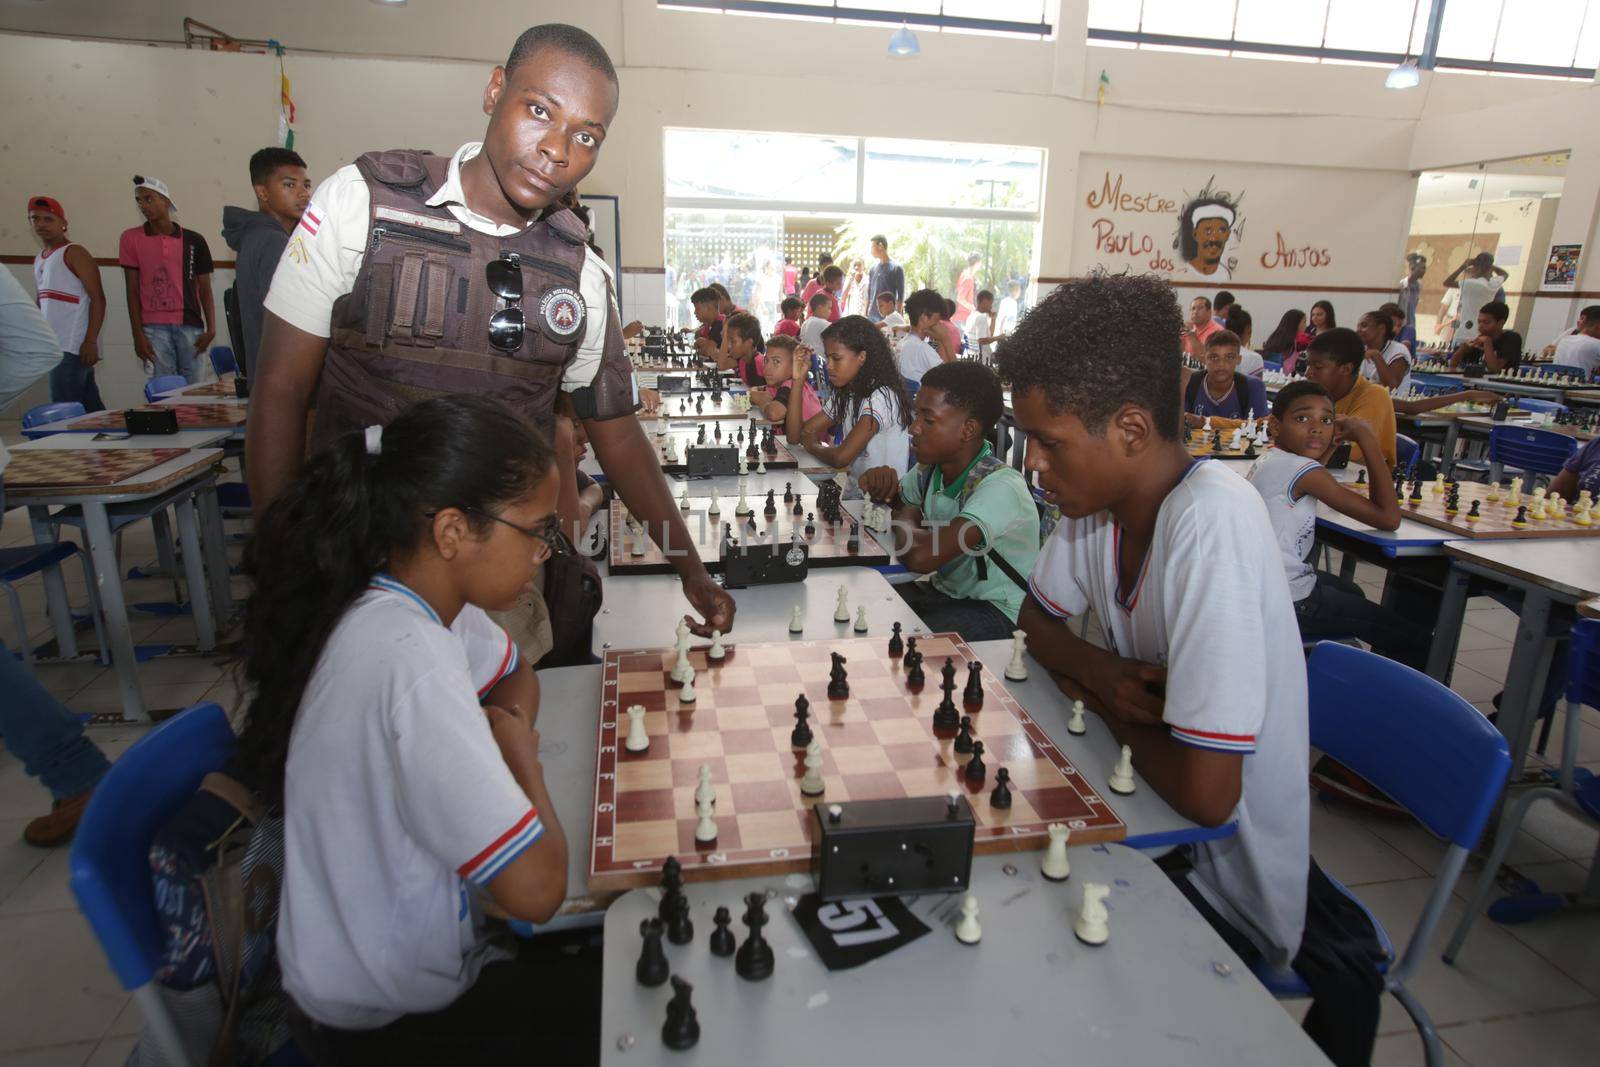 salvador, bahia / brazil - november 8, 2018: Public school students in the Paz neighborhood of Salvador are seen playing chess.